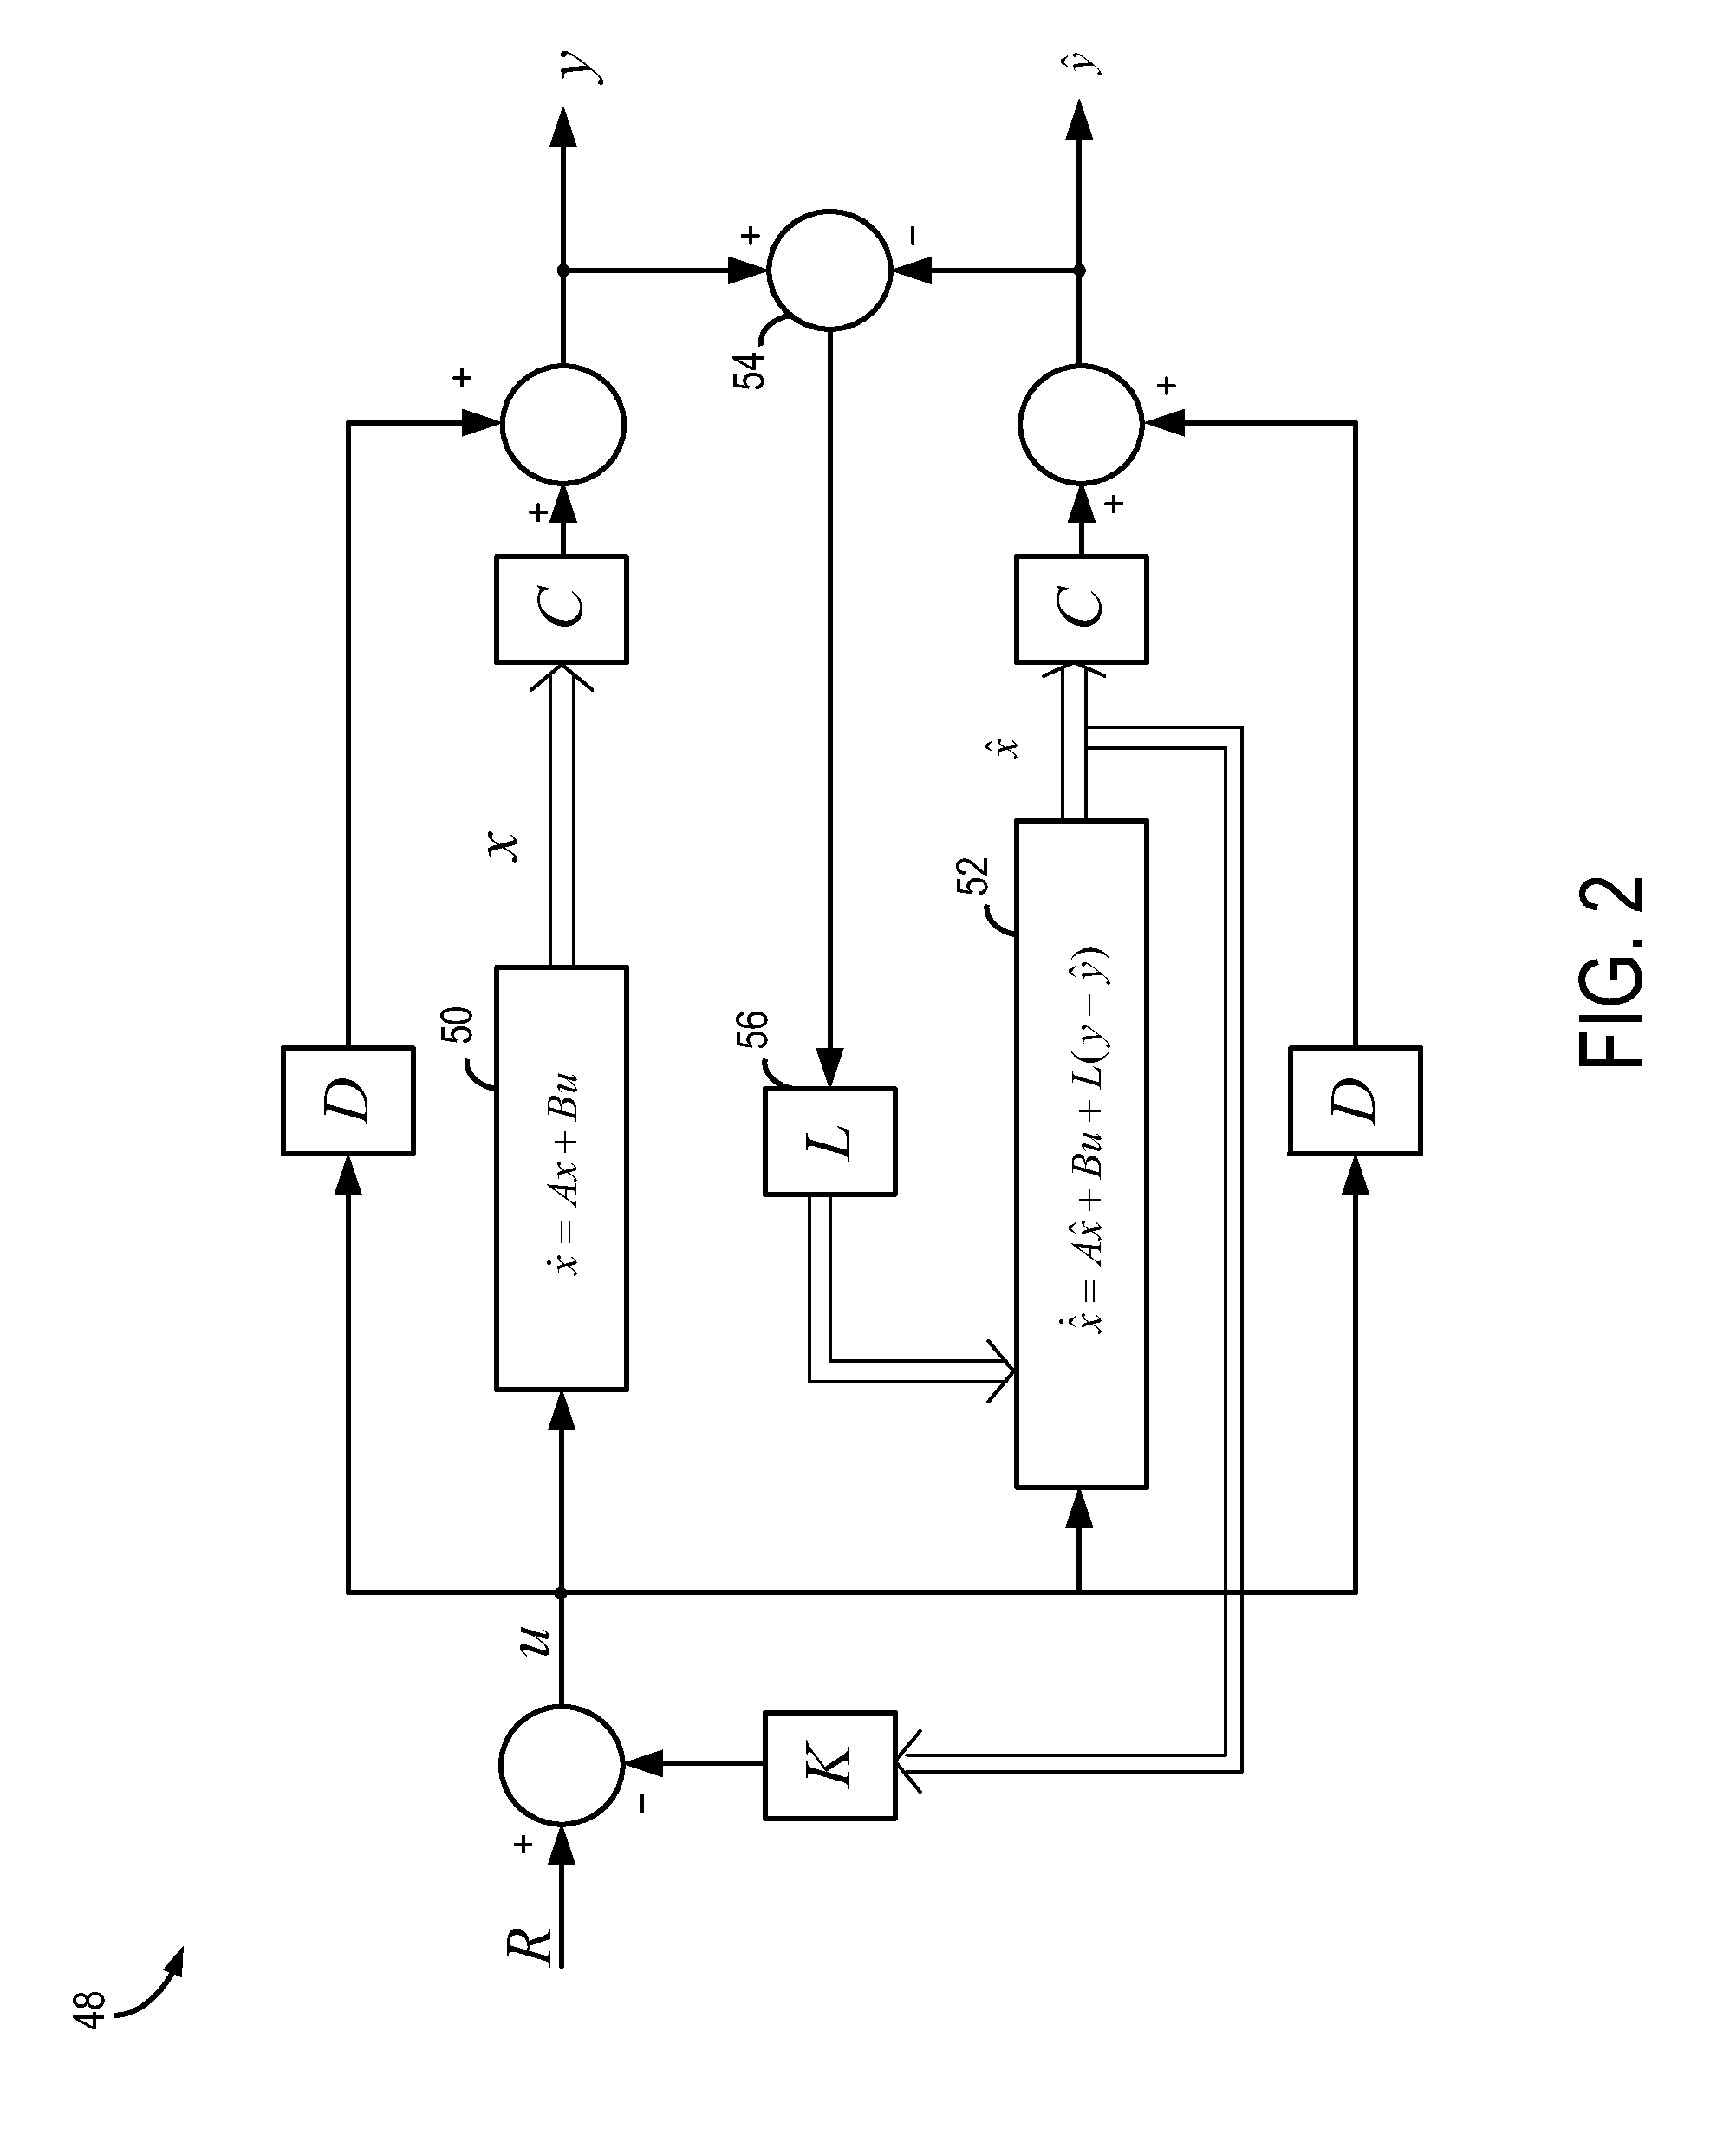 System and method for detecting phase loss and diagnosing DC link capacitor health in an adjustable speed drive